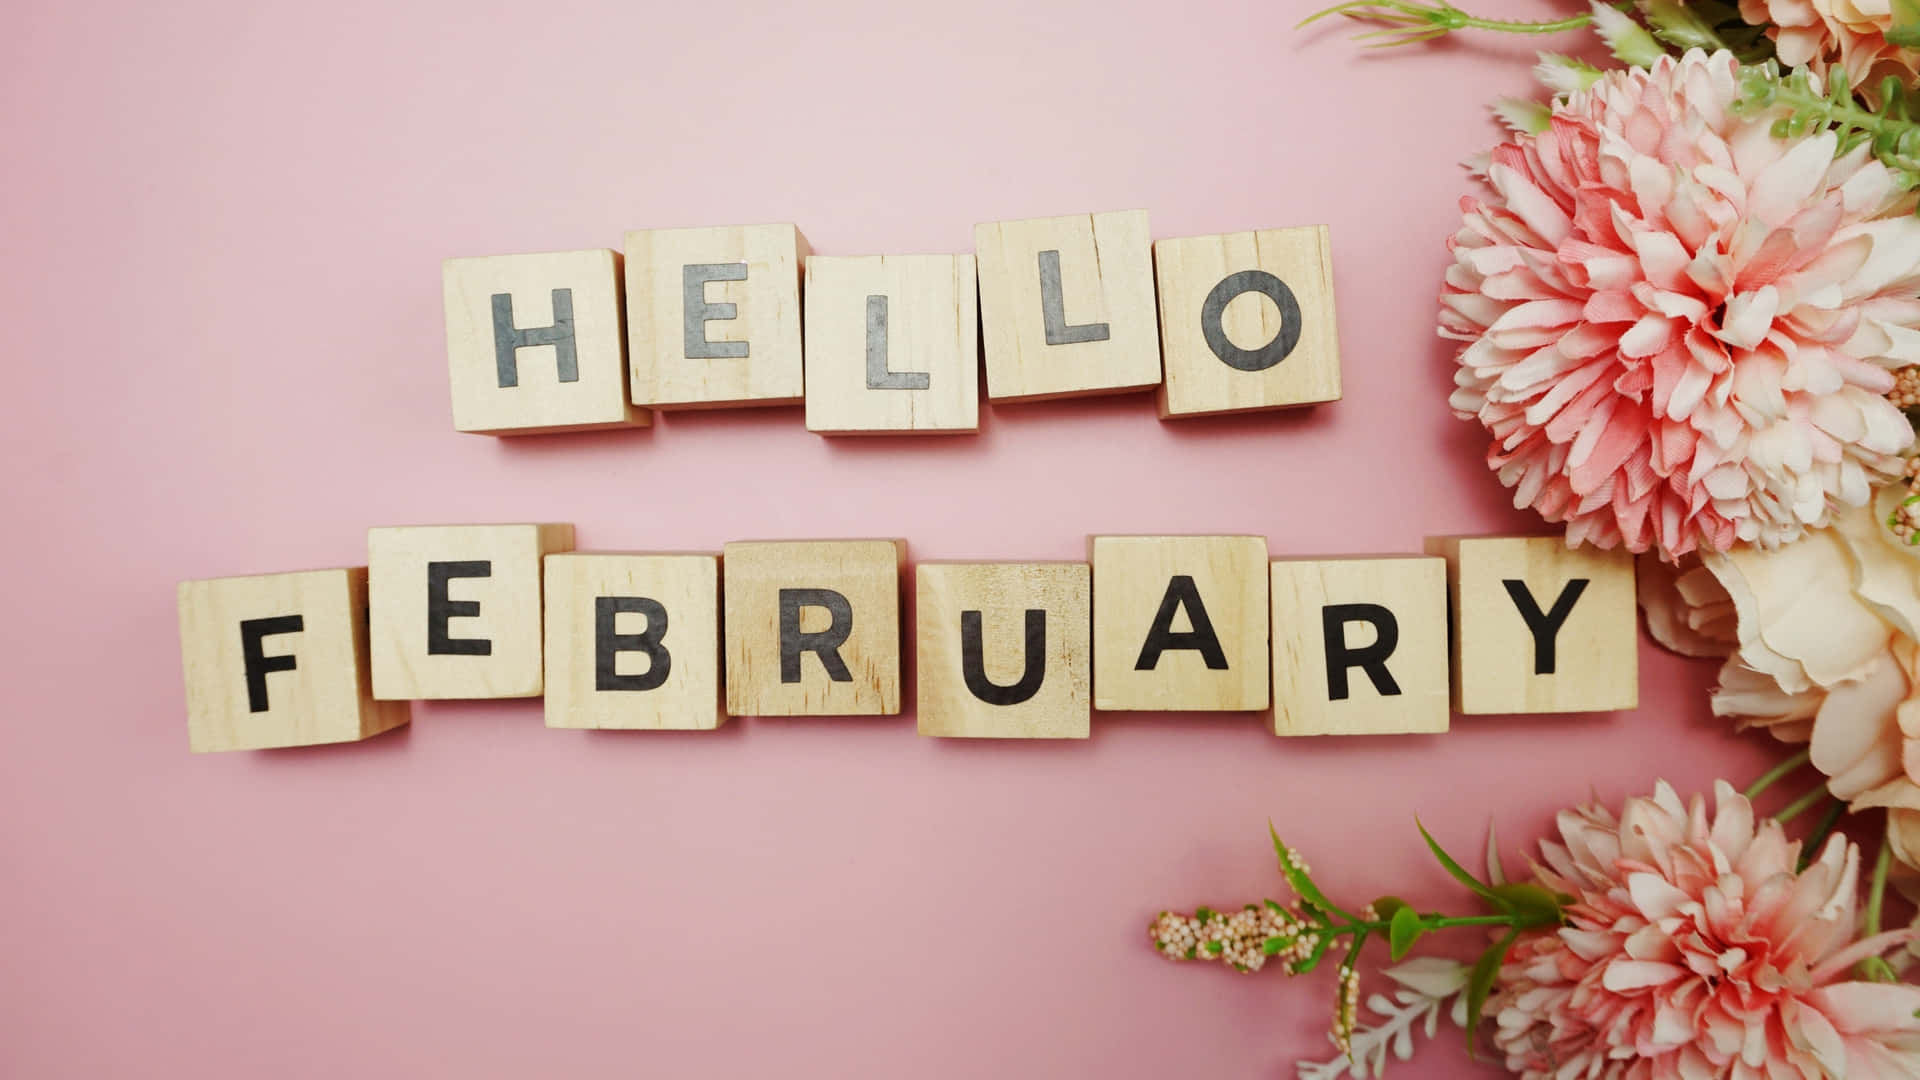 Hello February Wooden Blocks Floral Background Wallpaper